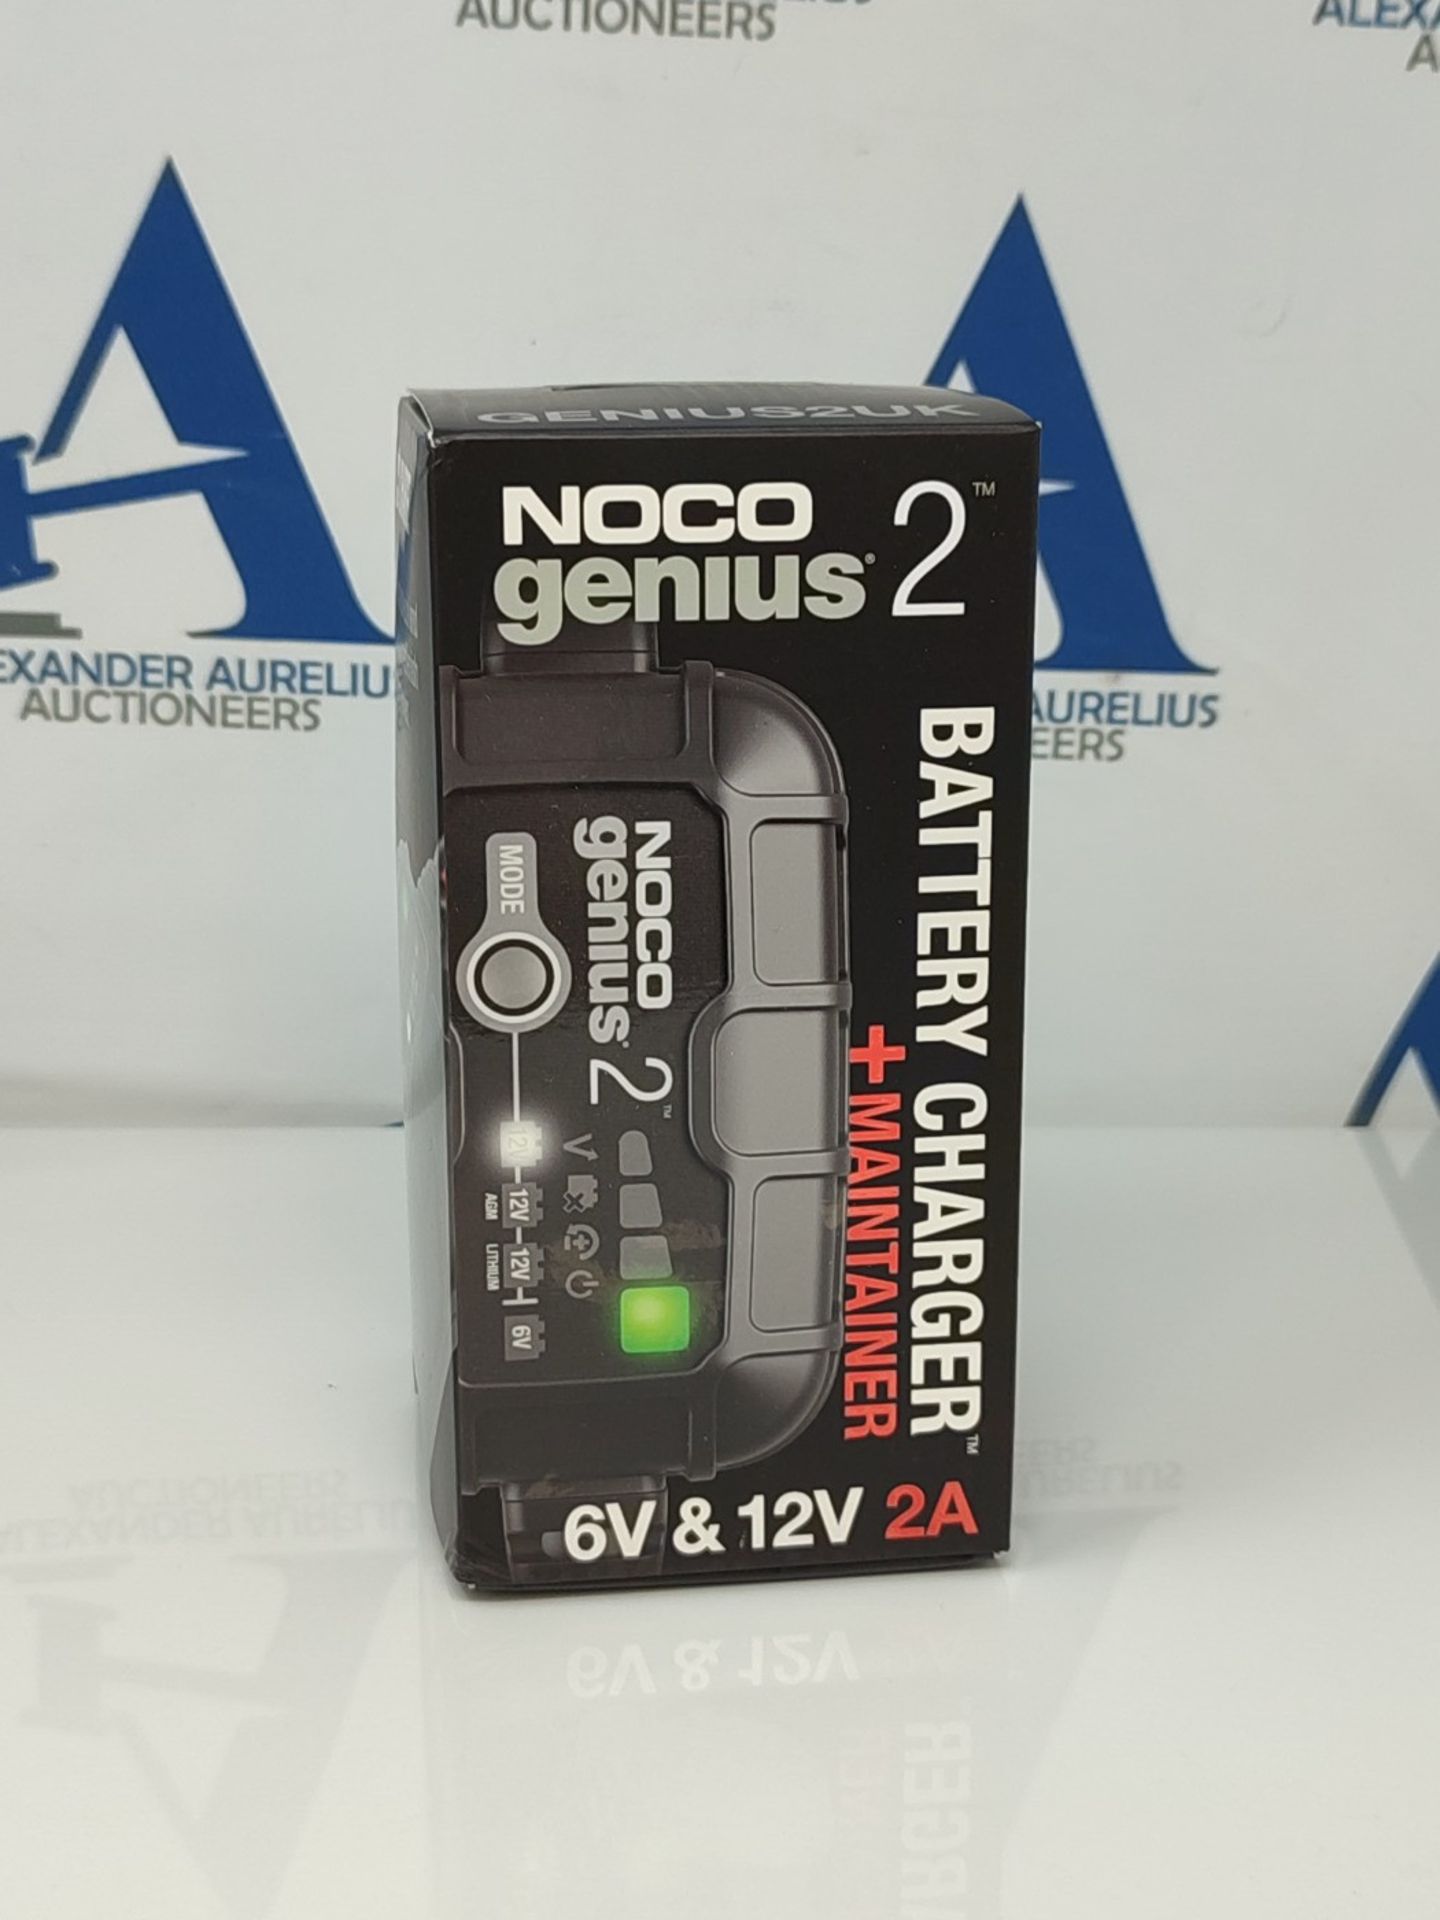 RRP £54.00 NOCO GENIUS2UK, 2A Car Battery Charger, 6V and 12V Portable Smart Charger, Battery Mai - Image 2 of 3